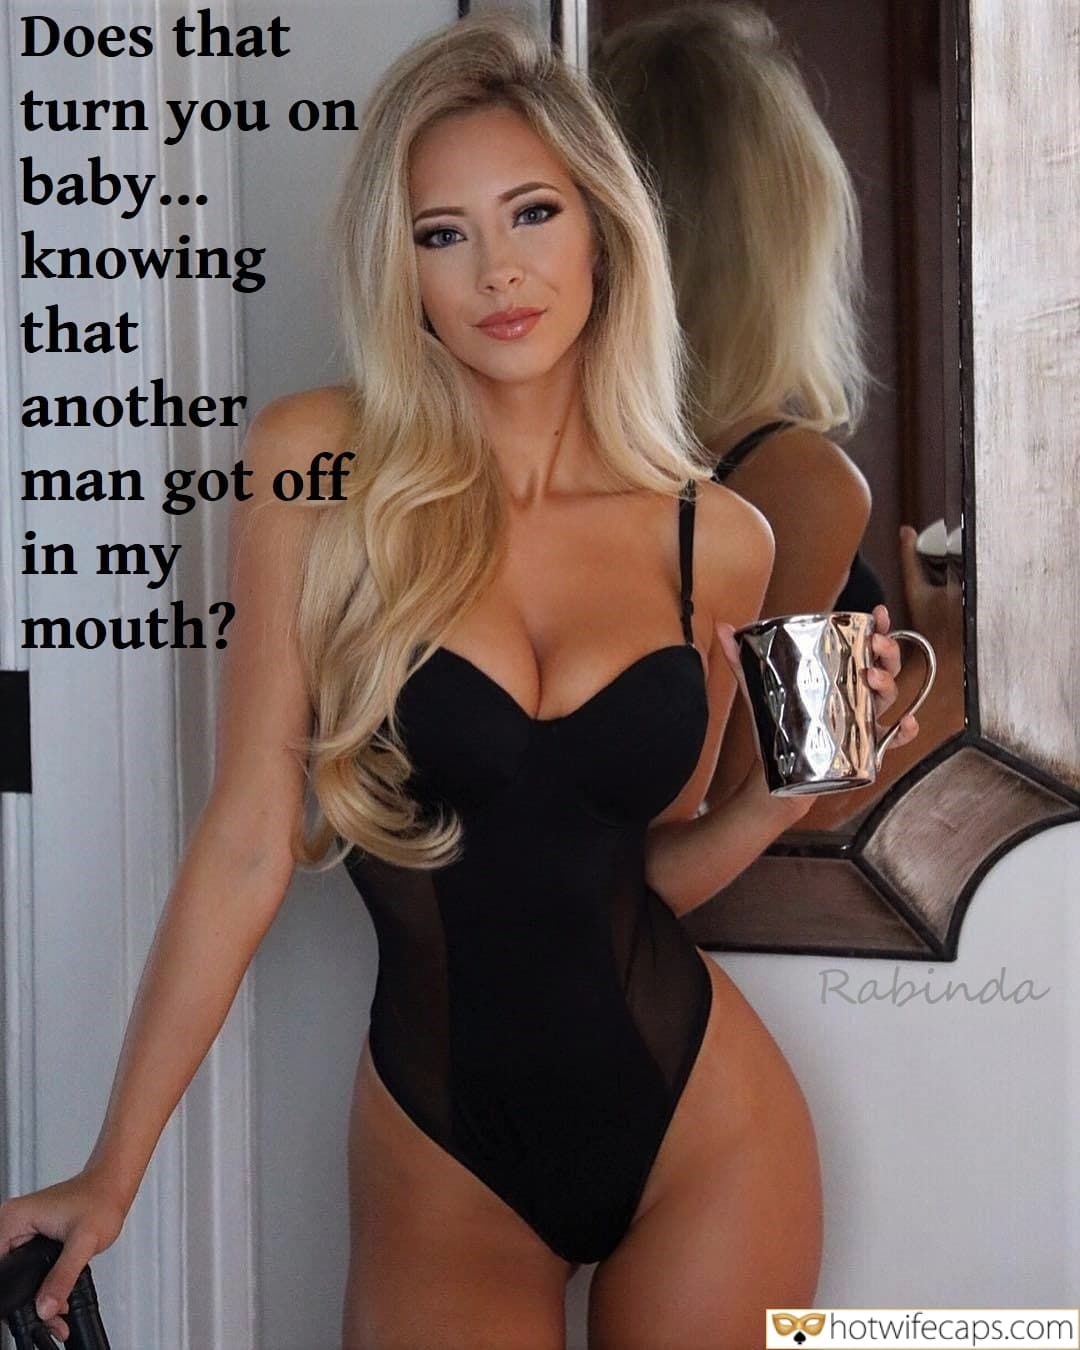 Bigger Cock, Blowjob, Bull, Bully, Sexy Memes, Wife Sharing Hotwife Caption №565248 mature blonde with a perfect body Adult Picture